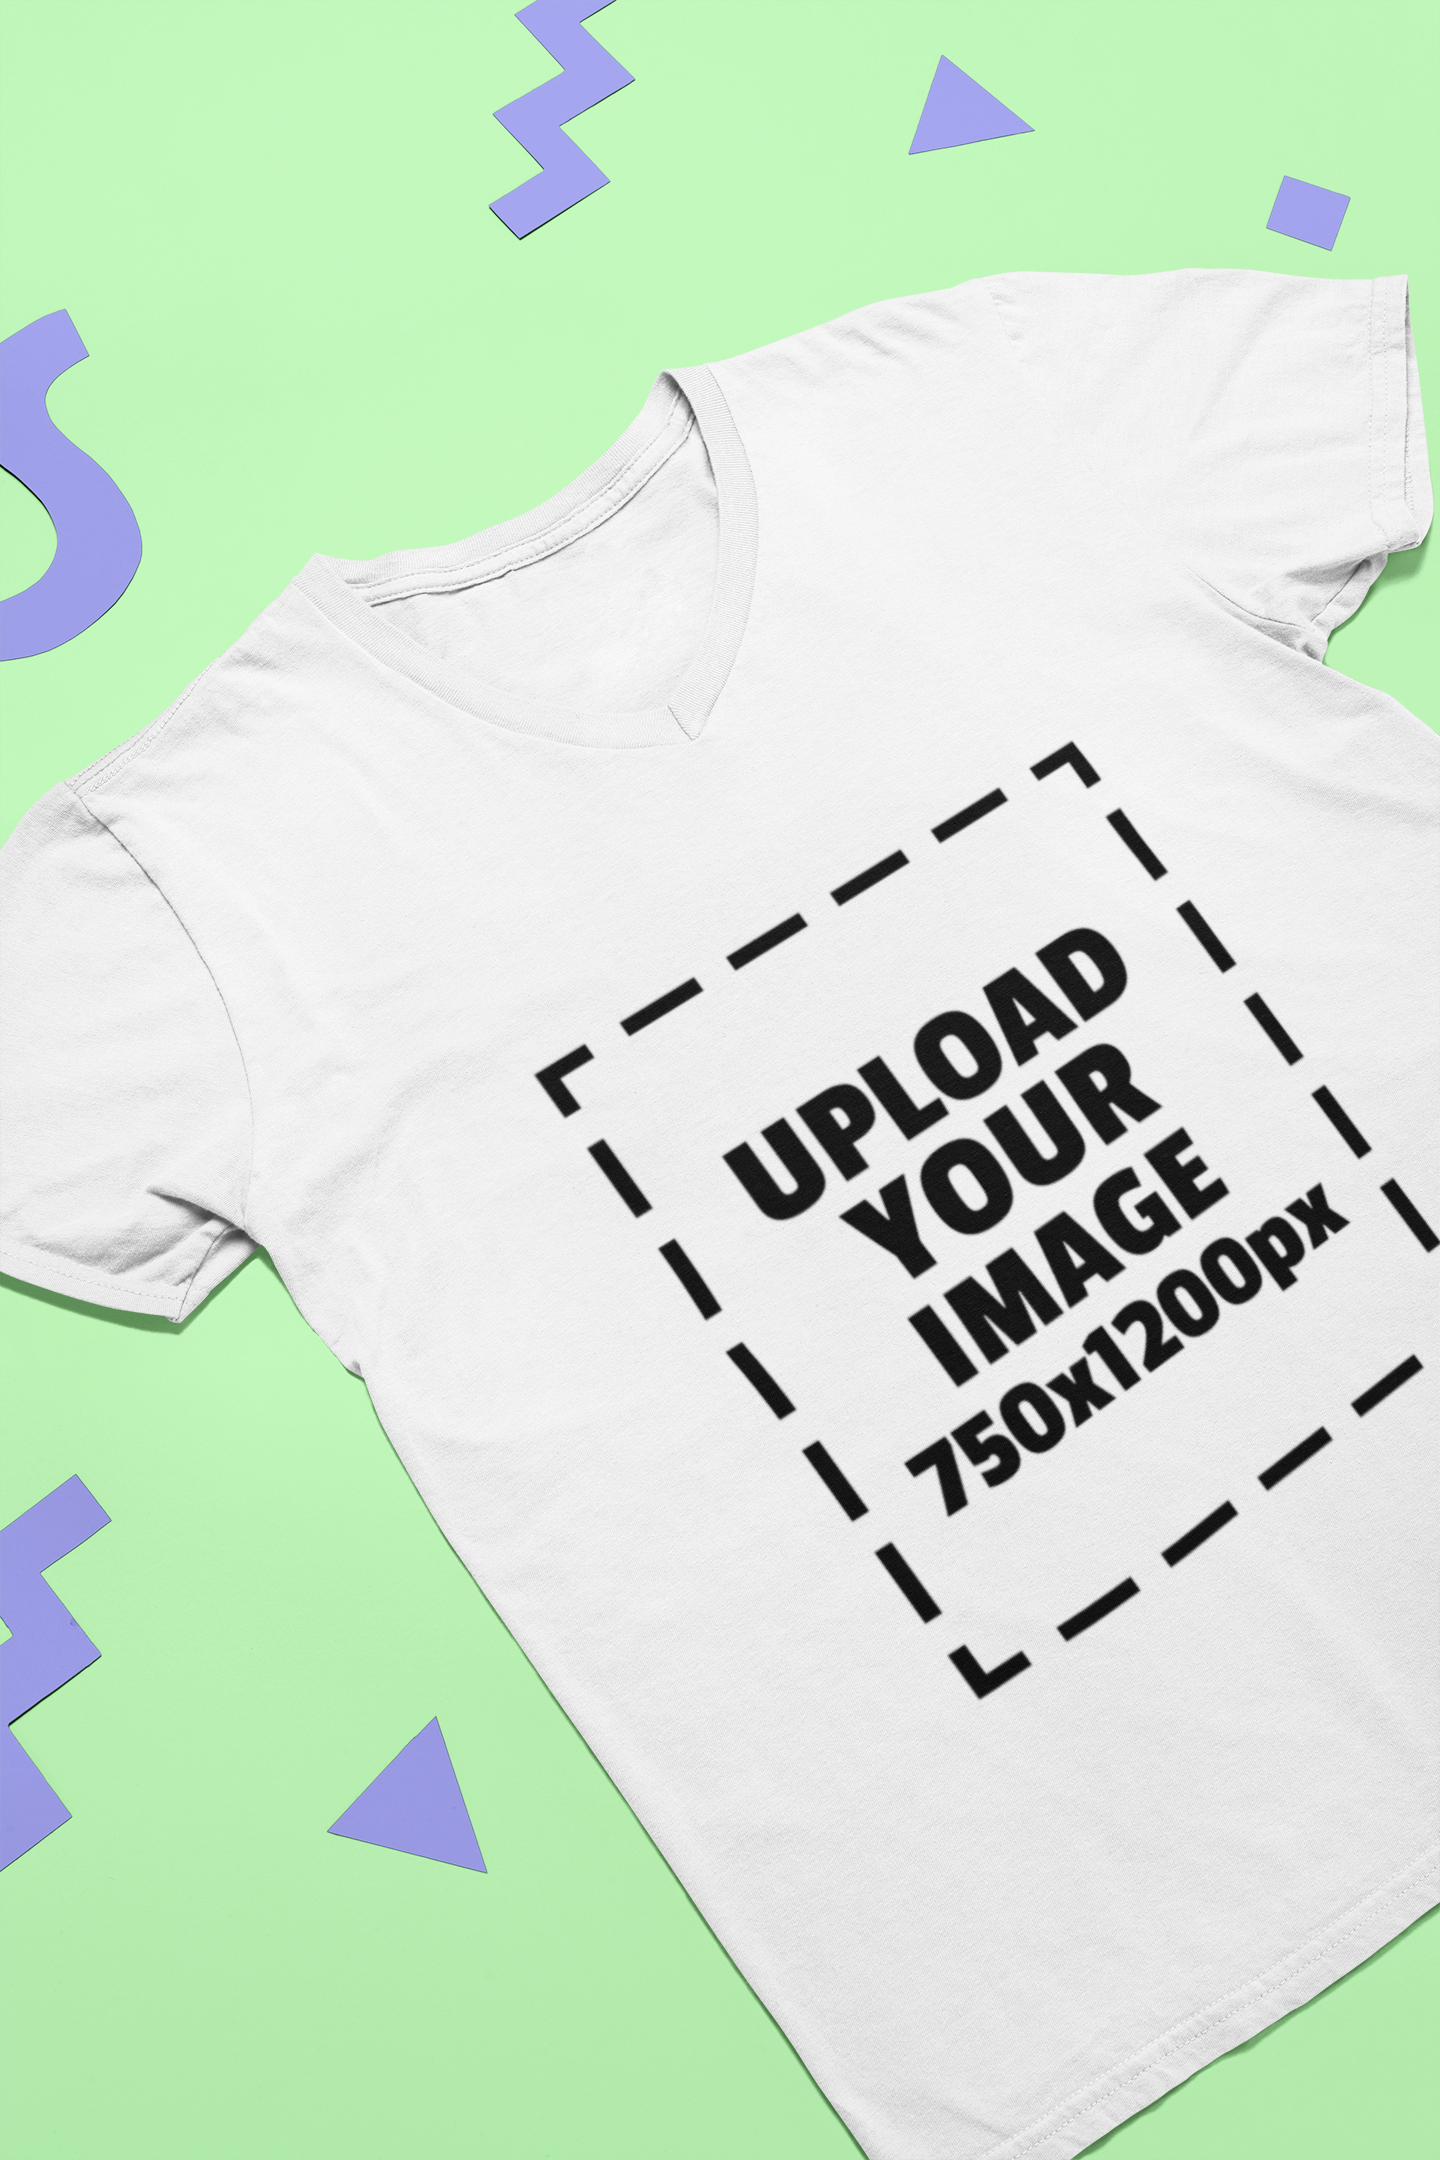 Download Mockup of a T-Shirt Lying Flat over Cut out Shapes by ...